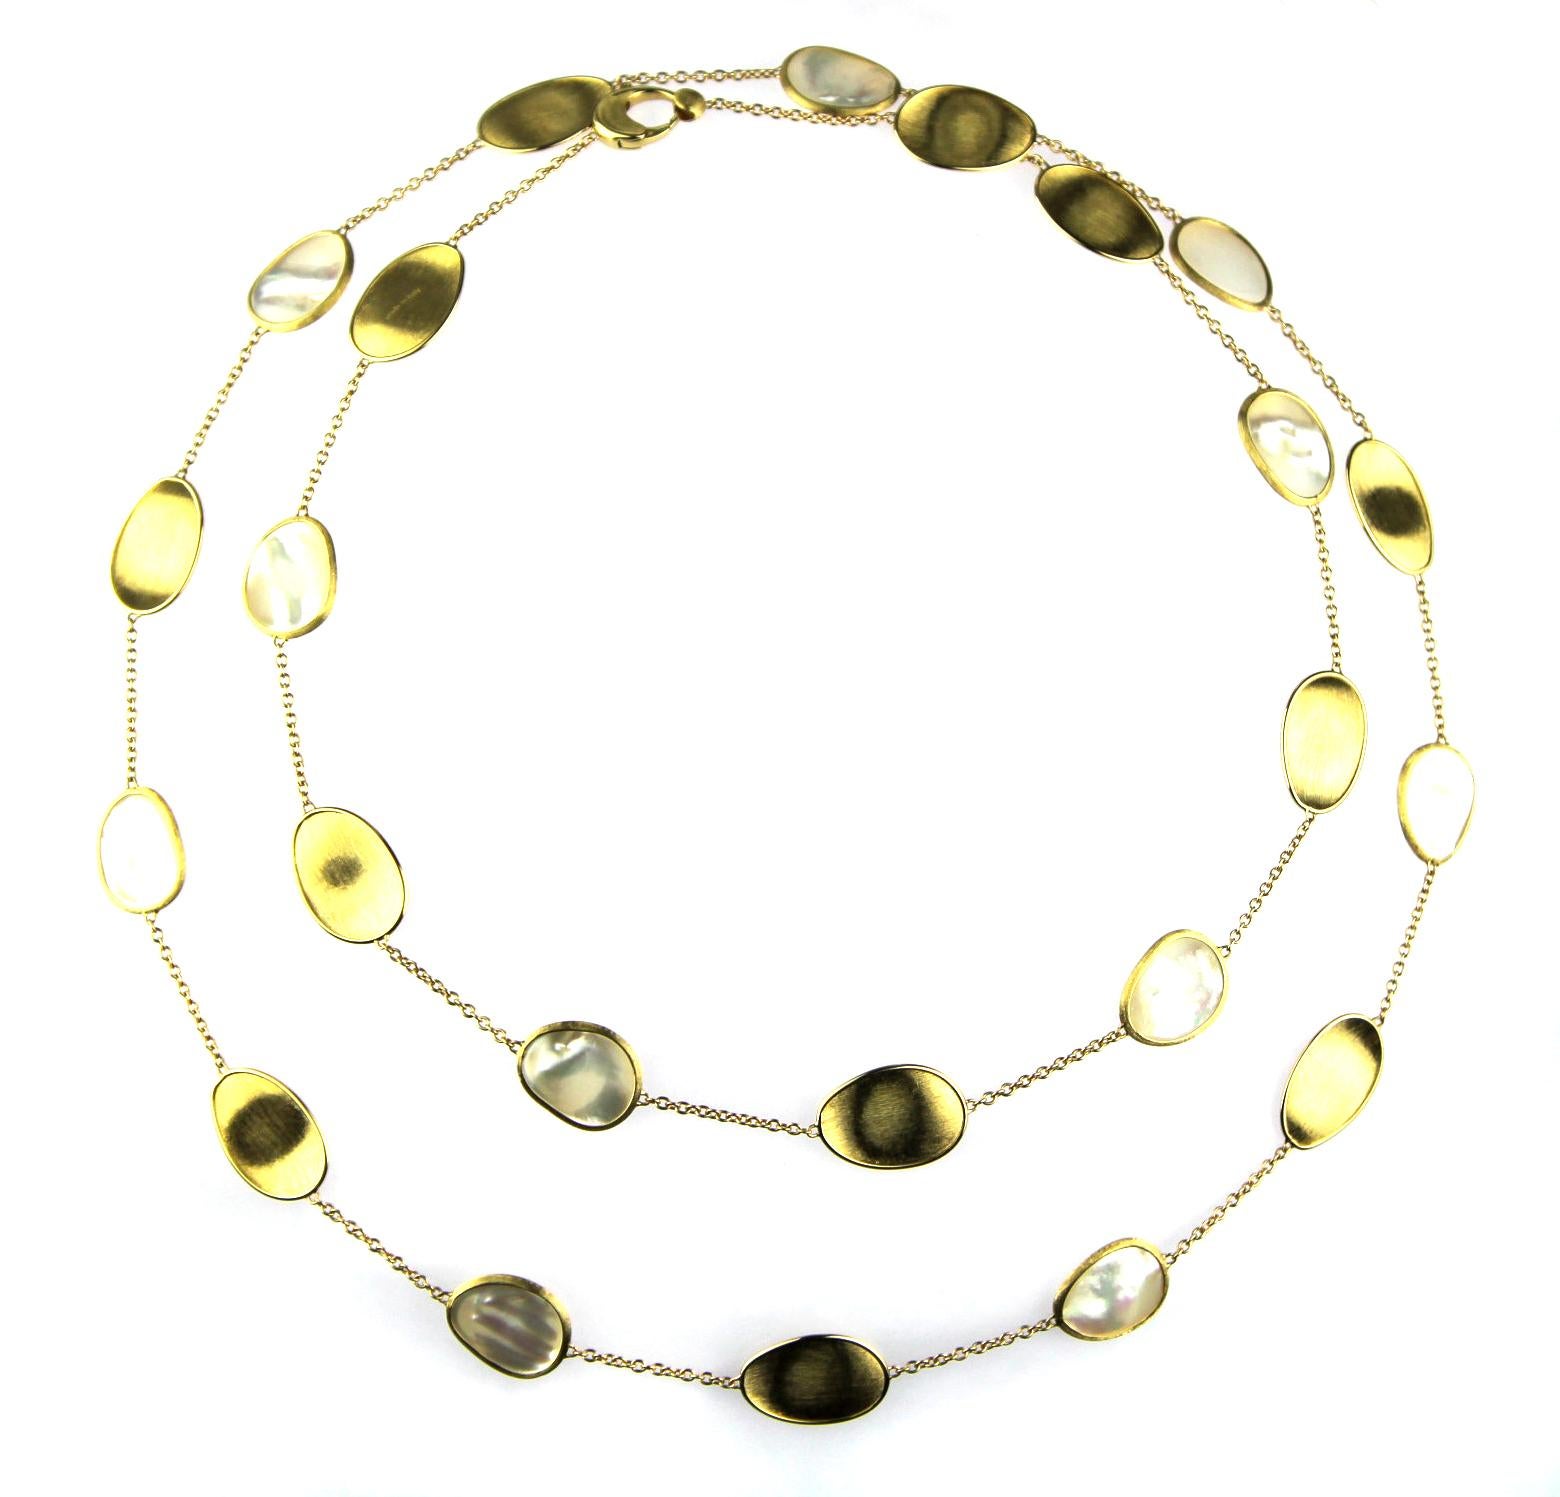 Modern Marco Bicego Lunaria 18 Karat Yellow Gold White Mother of Pearl Long Necklace